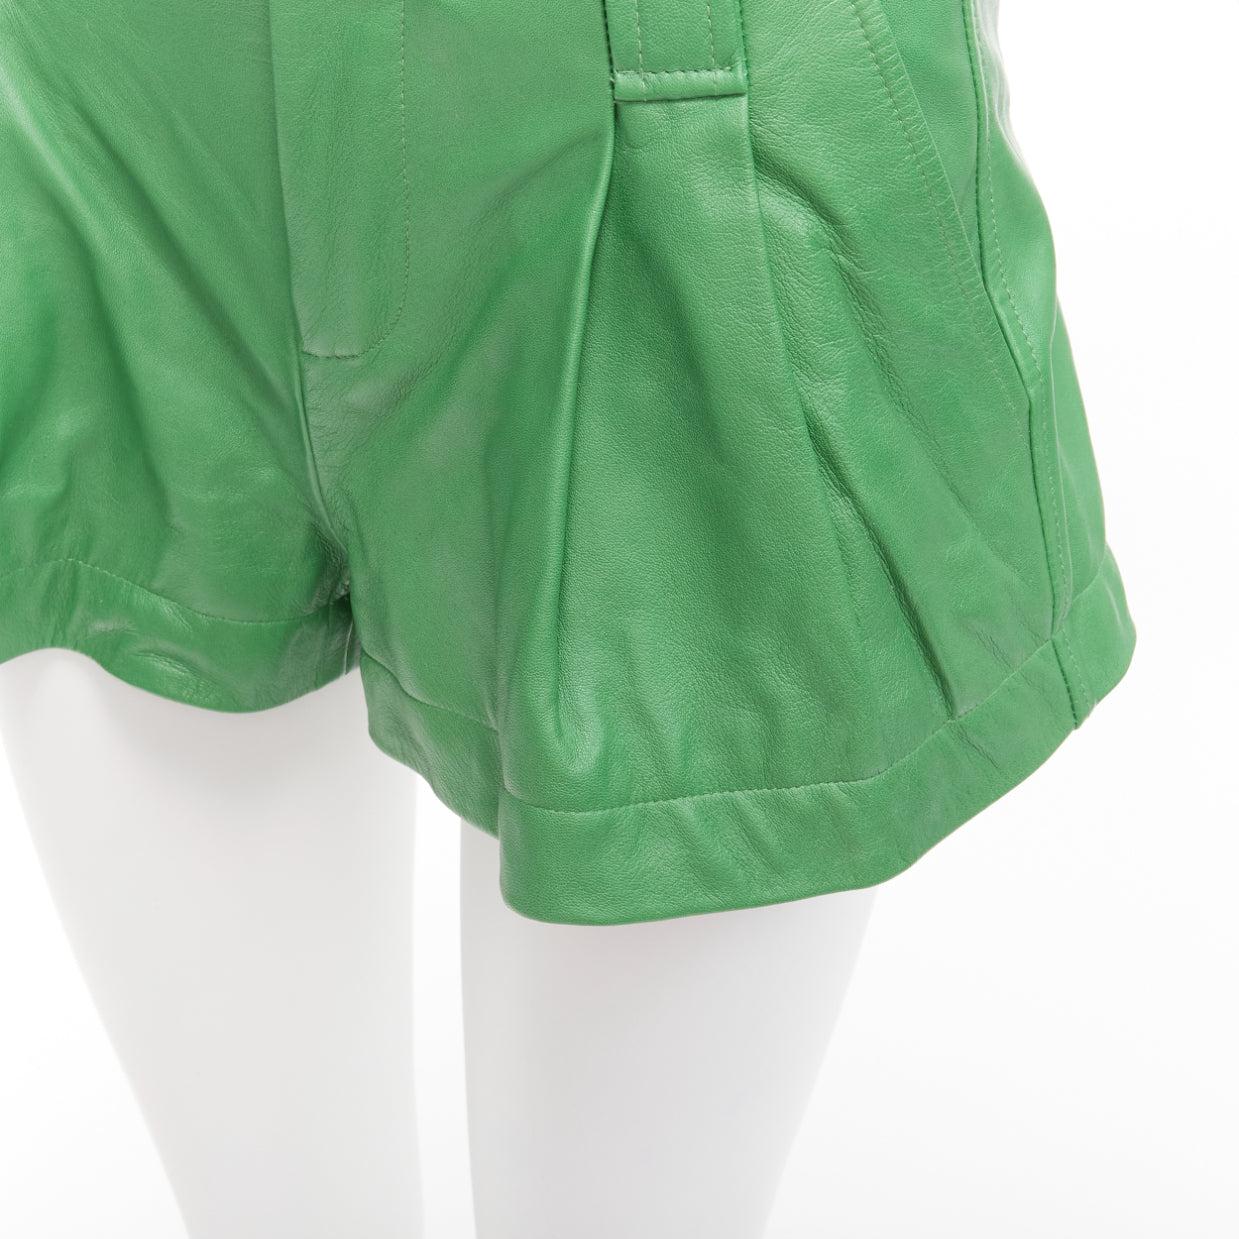 GANNI green lambskin leather high waist flared shorts FR32 XXS
Reference: AAWC/A00869
Brand: Ganni
Material: Lambskin Leather
Color: Green
Pattern: Solid
Closure: Zip Fly
Lining: Black Fabric
Made in: India

CONDITION:
Condition: Very good, this